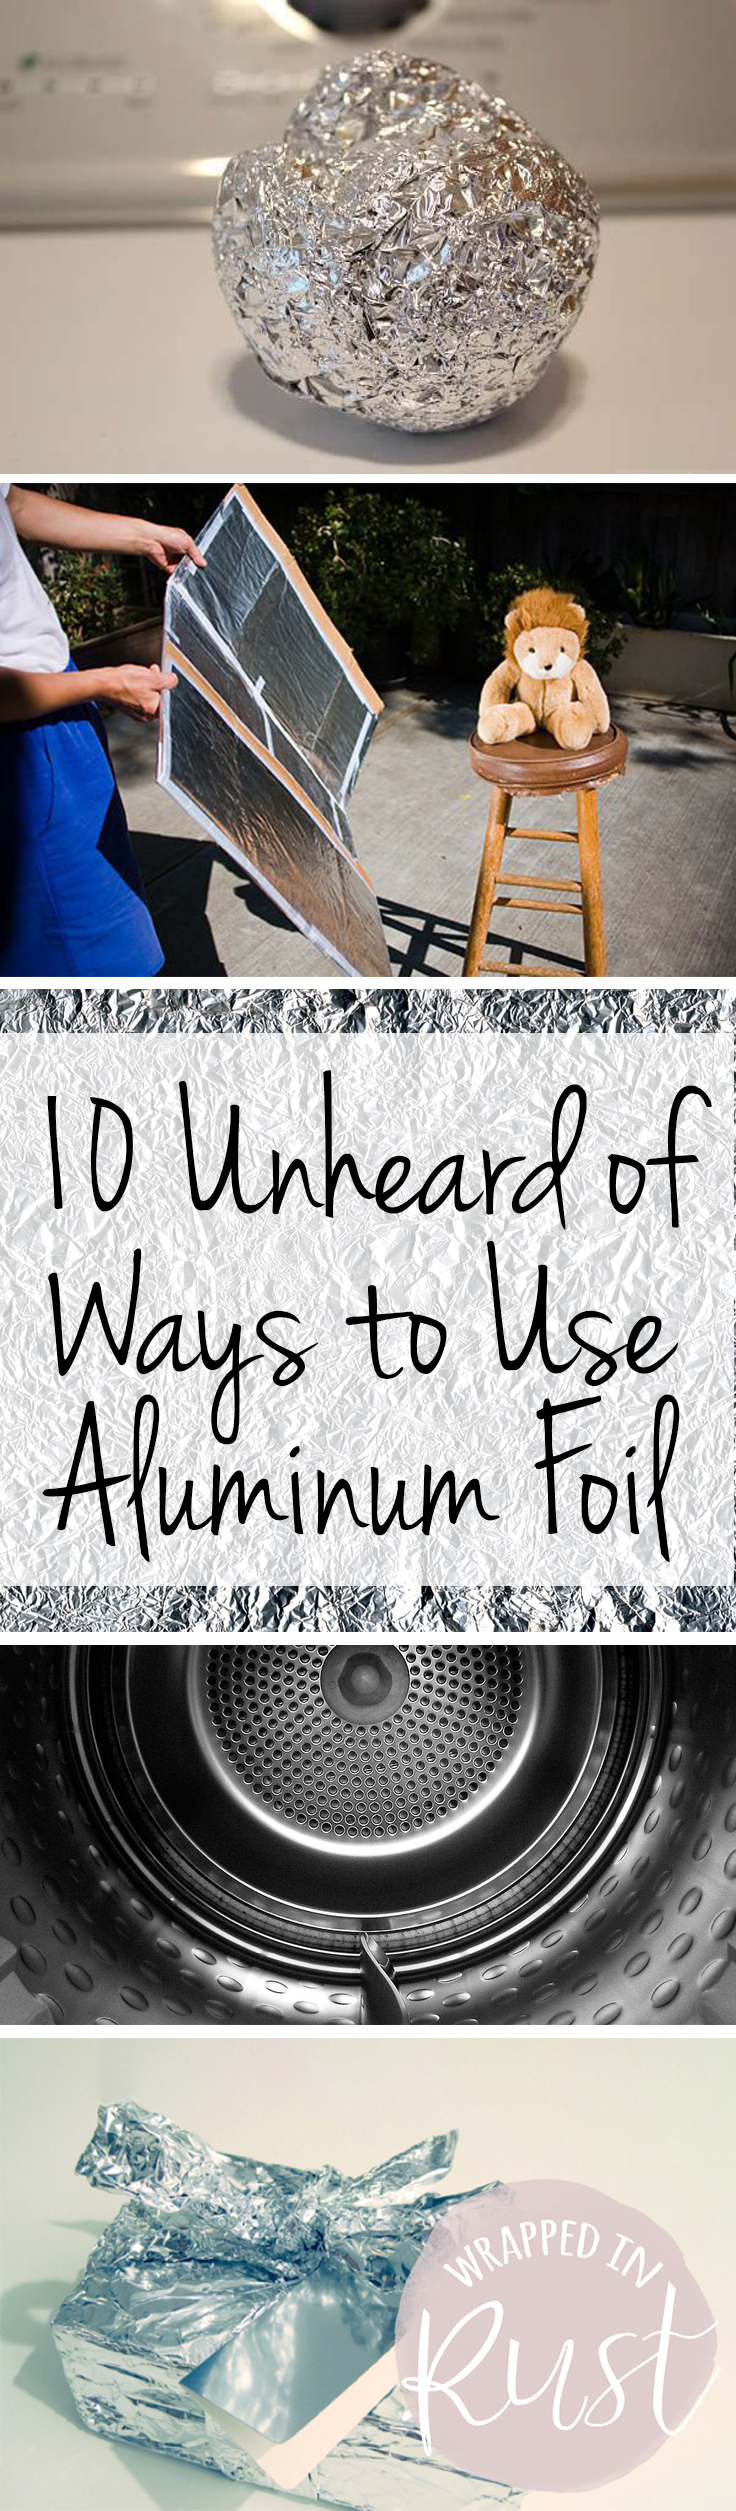 How to Use Aluminum Foil, Uses for Aluminum Foil, Things to Do With Aluminum Foil, Cleaning Tips and Tricks, Aluminum Foil, Life Hacks, Cleaning Hacks, Easy Cleaning Tips and Tricks, Popular Pin. 